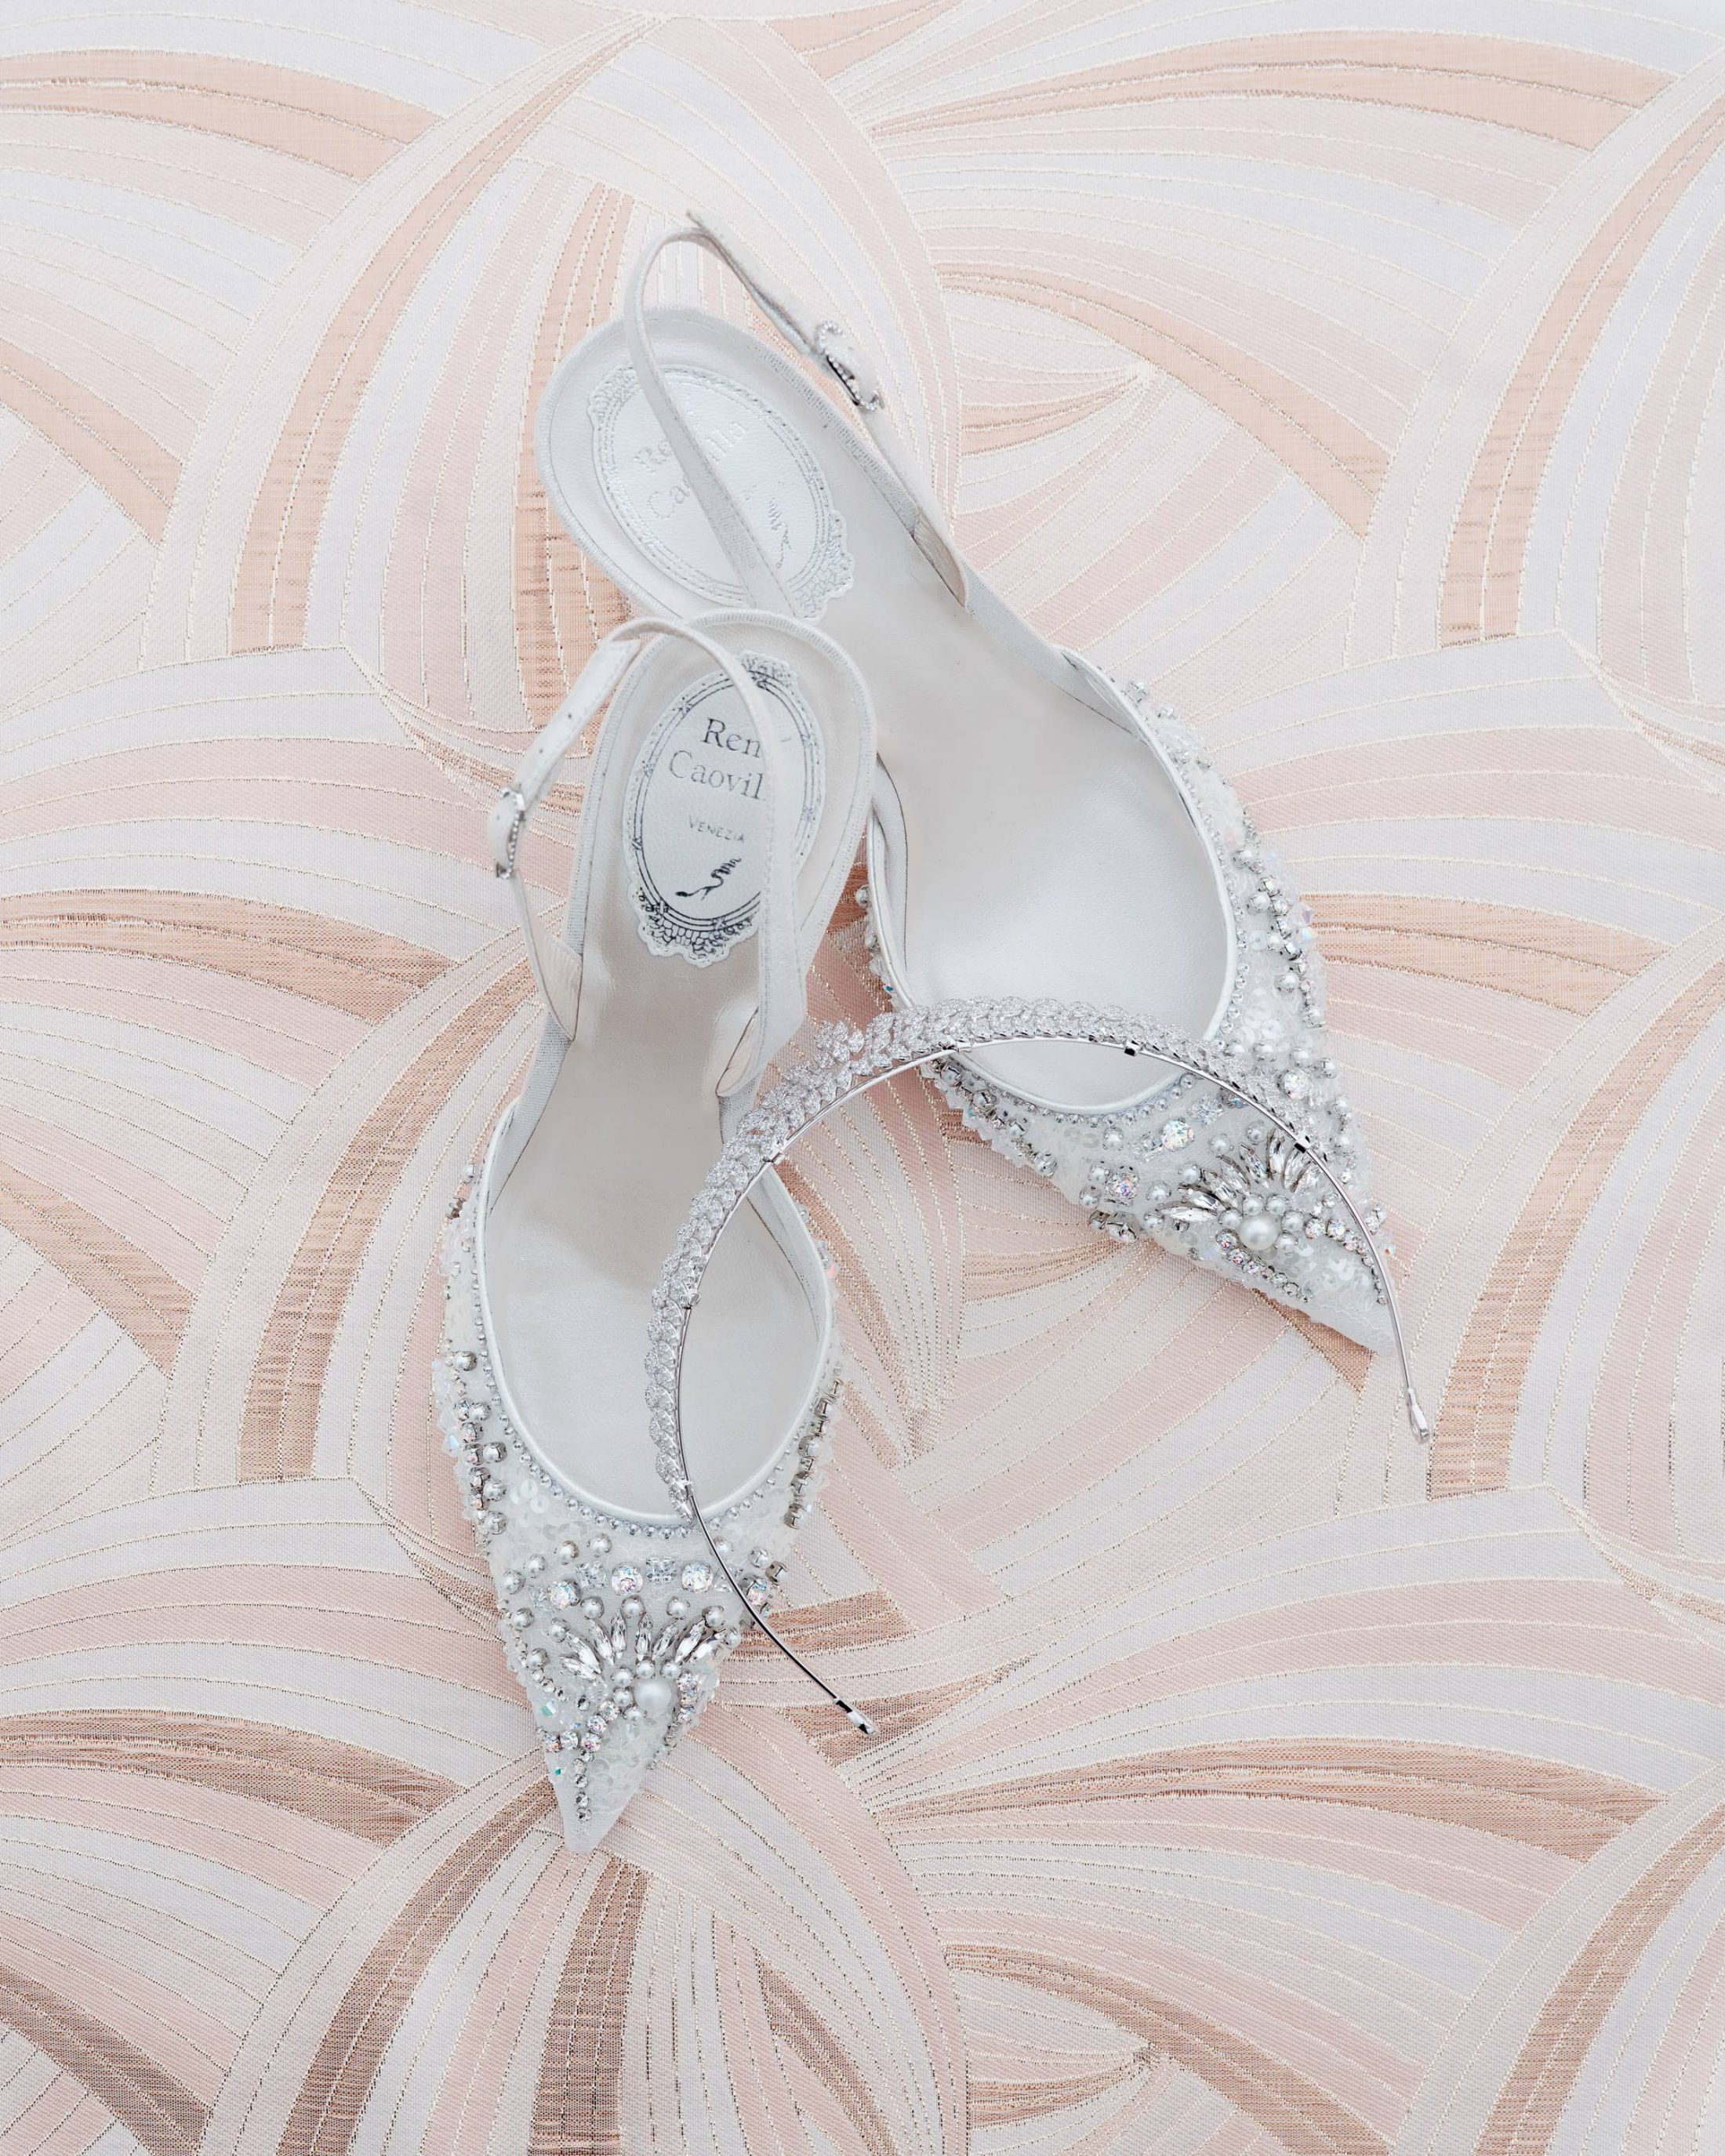 Bride's pointed toe slingback heels from Ren Caovilla at this Miami yacht wedding | Photo by Corbin Gurkin